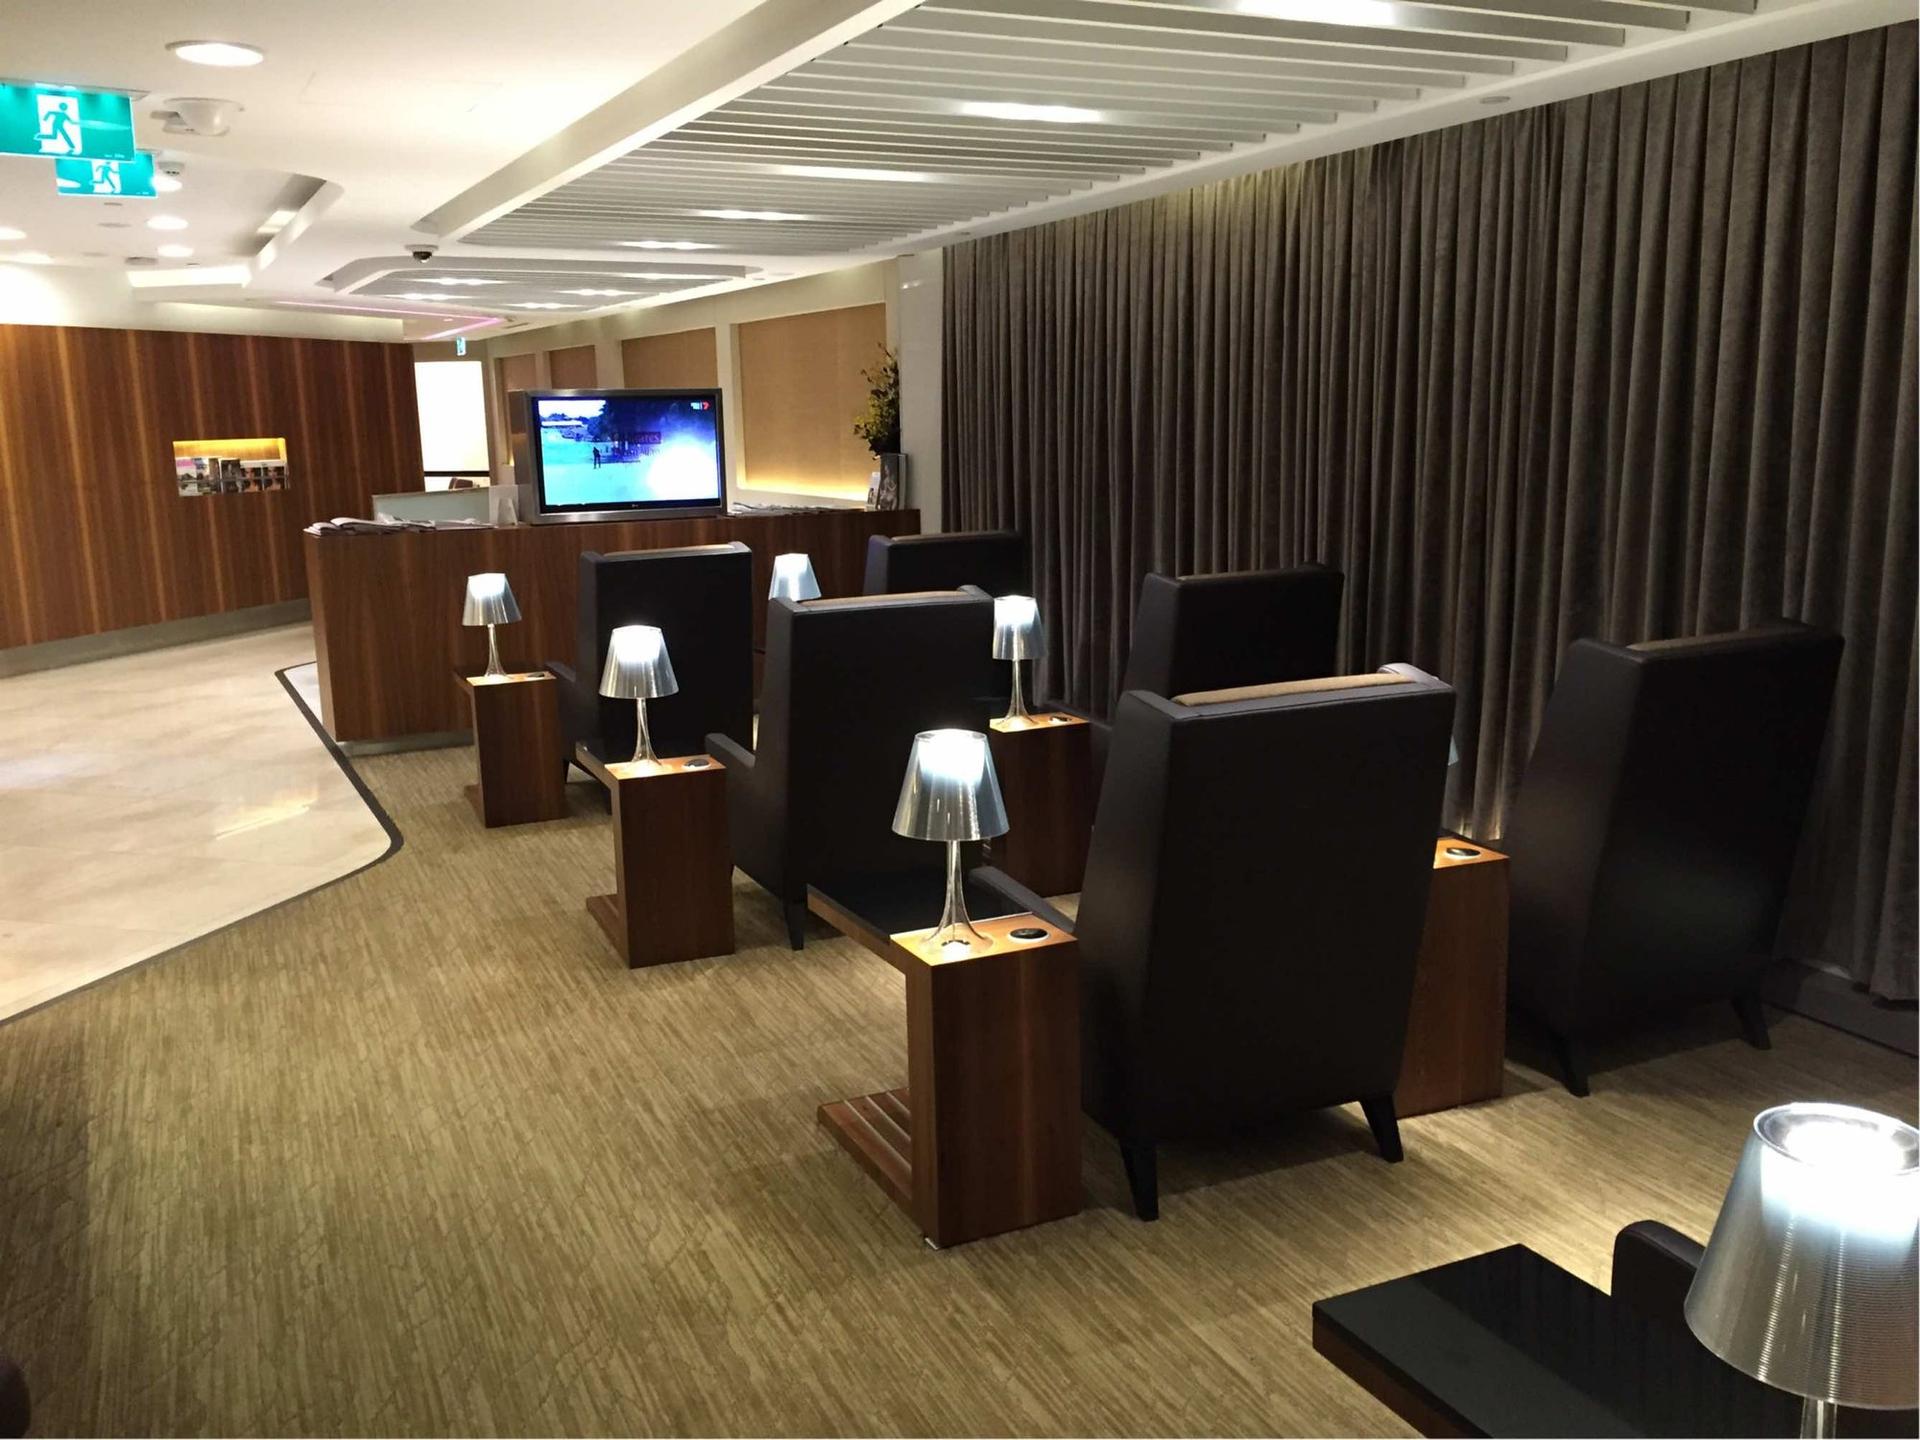 Singapore Airlines SilverKris First Class Lounge image 4 of 7